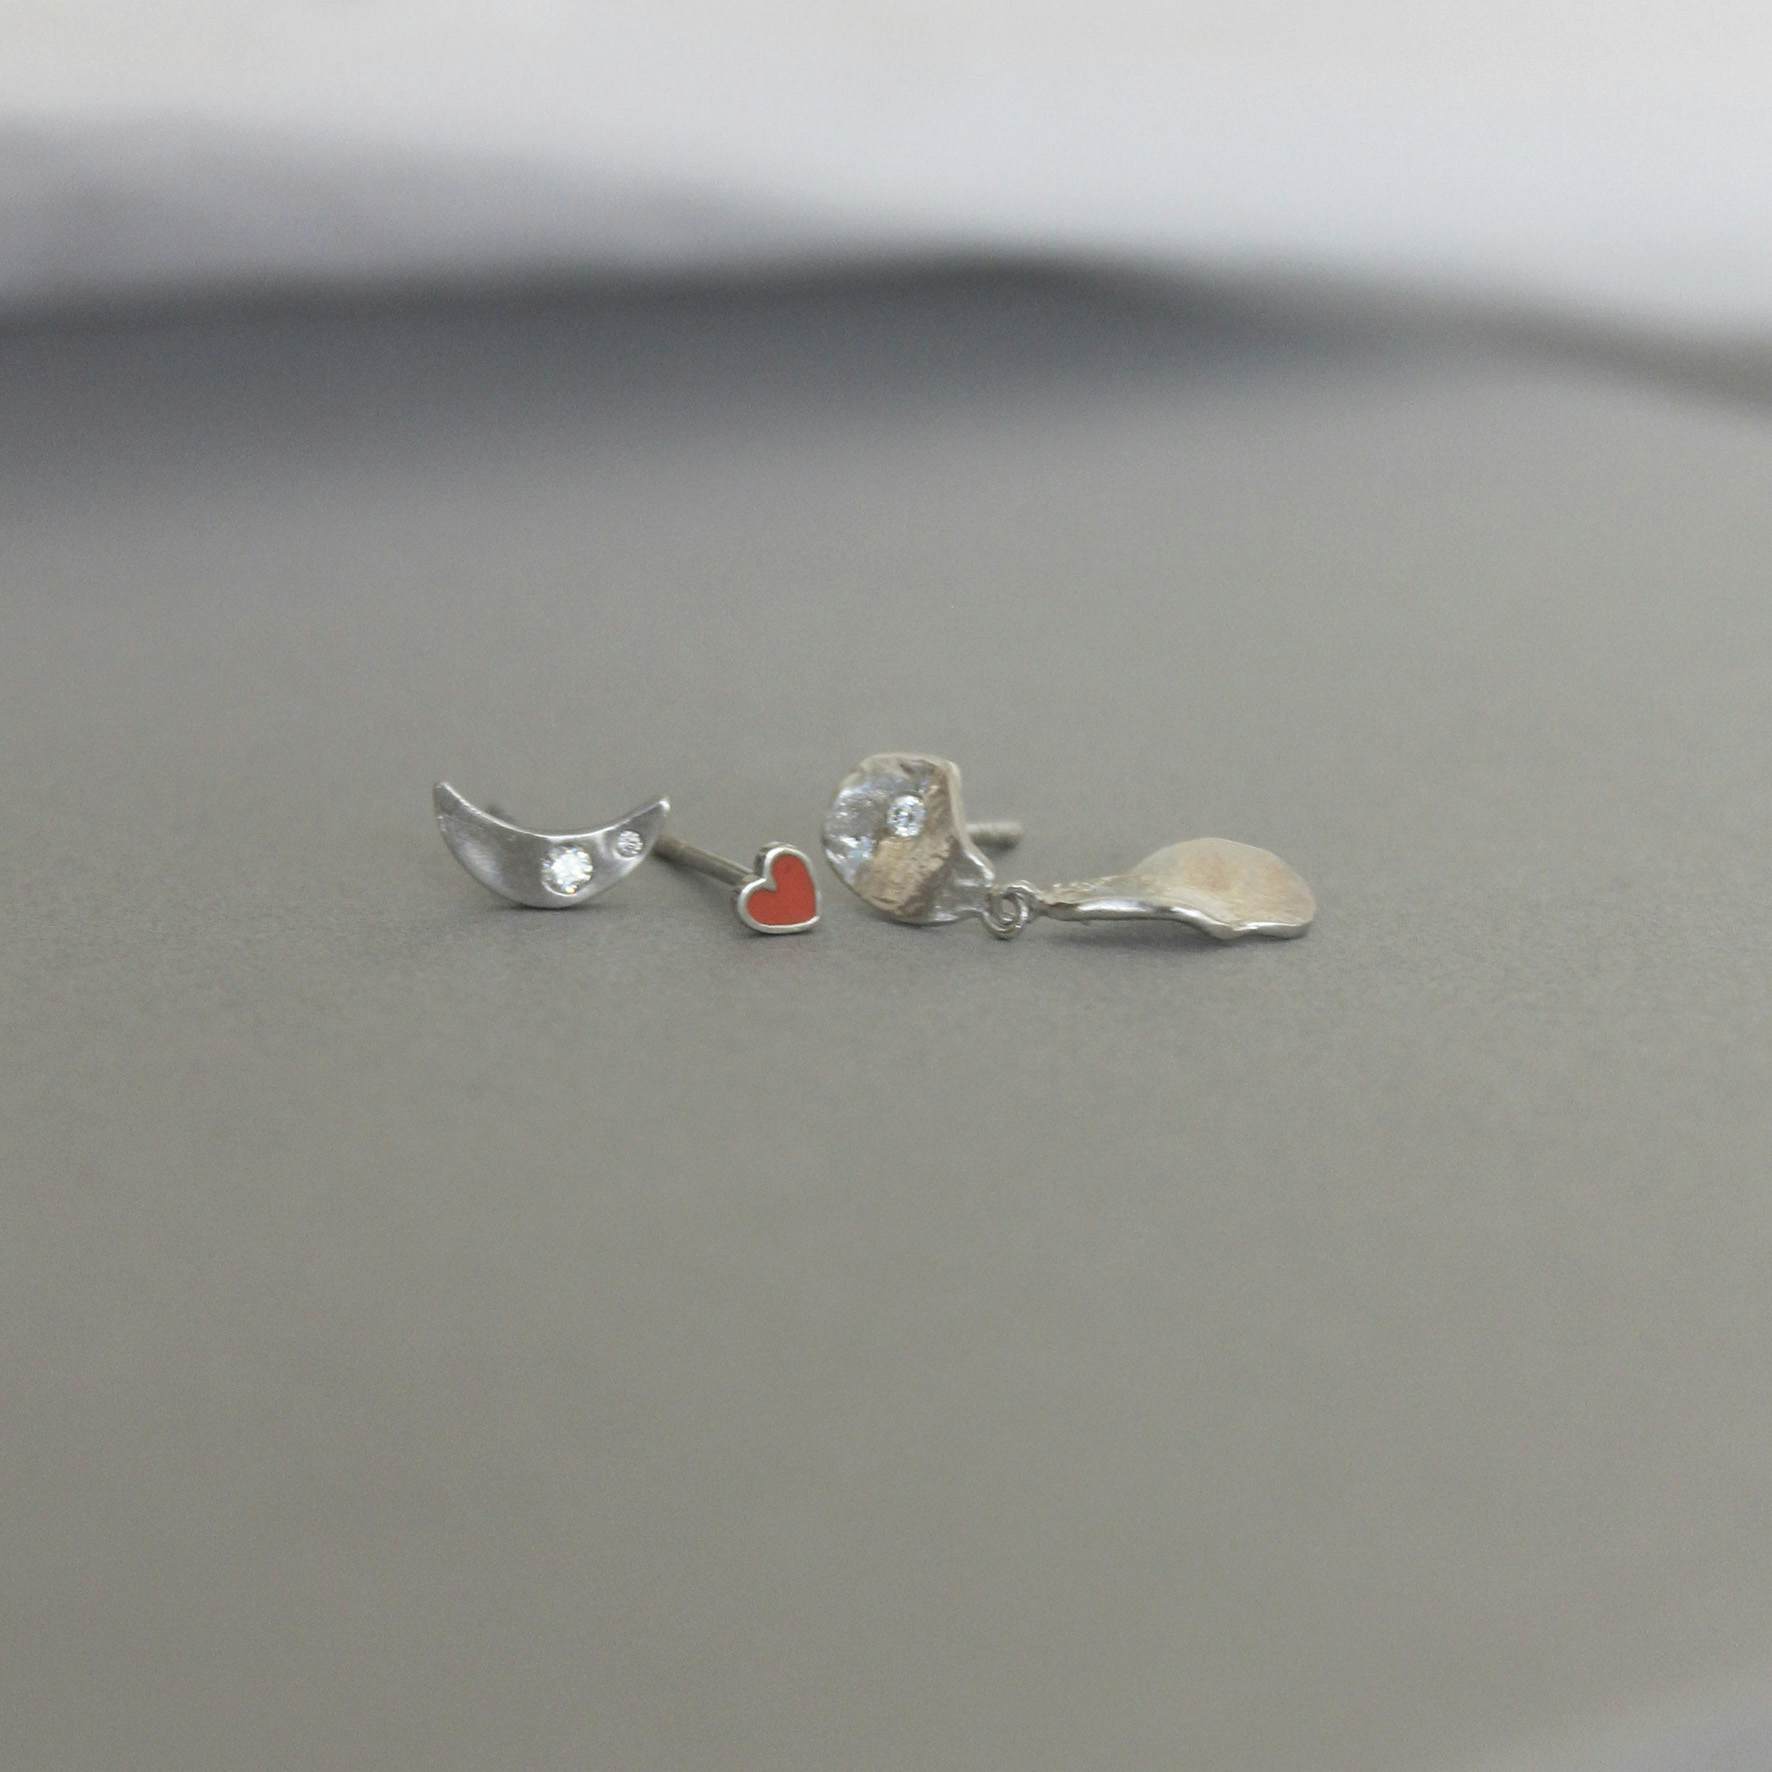 Clear Sea Earring With Stone von STINE A Jewelry in Silber Sterling 925